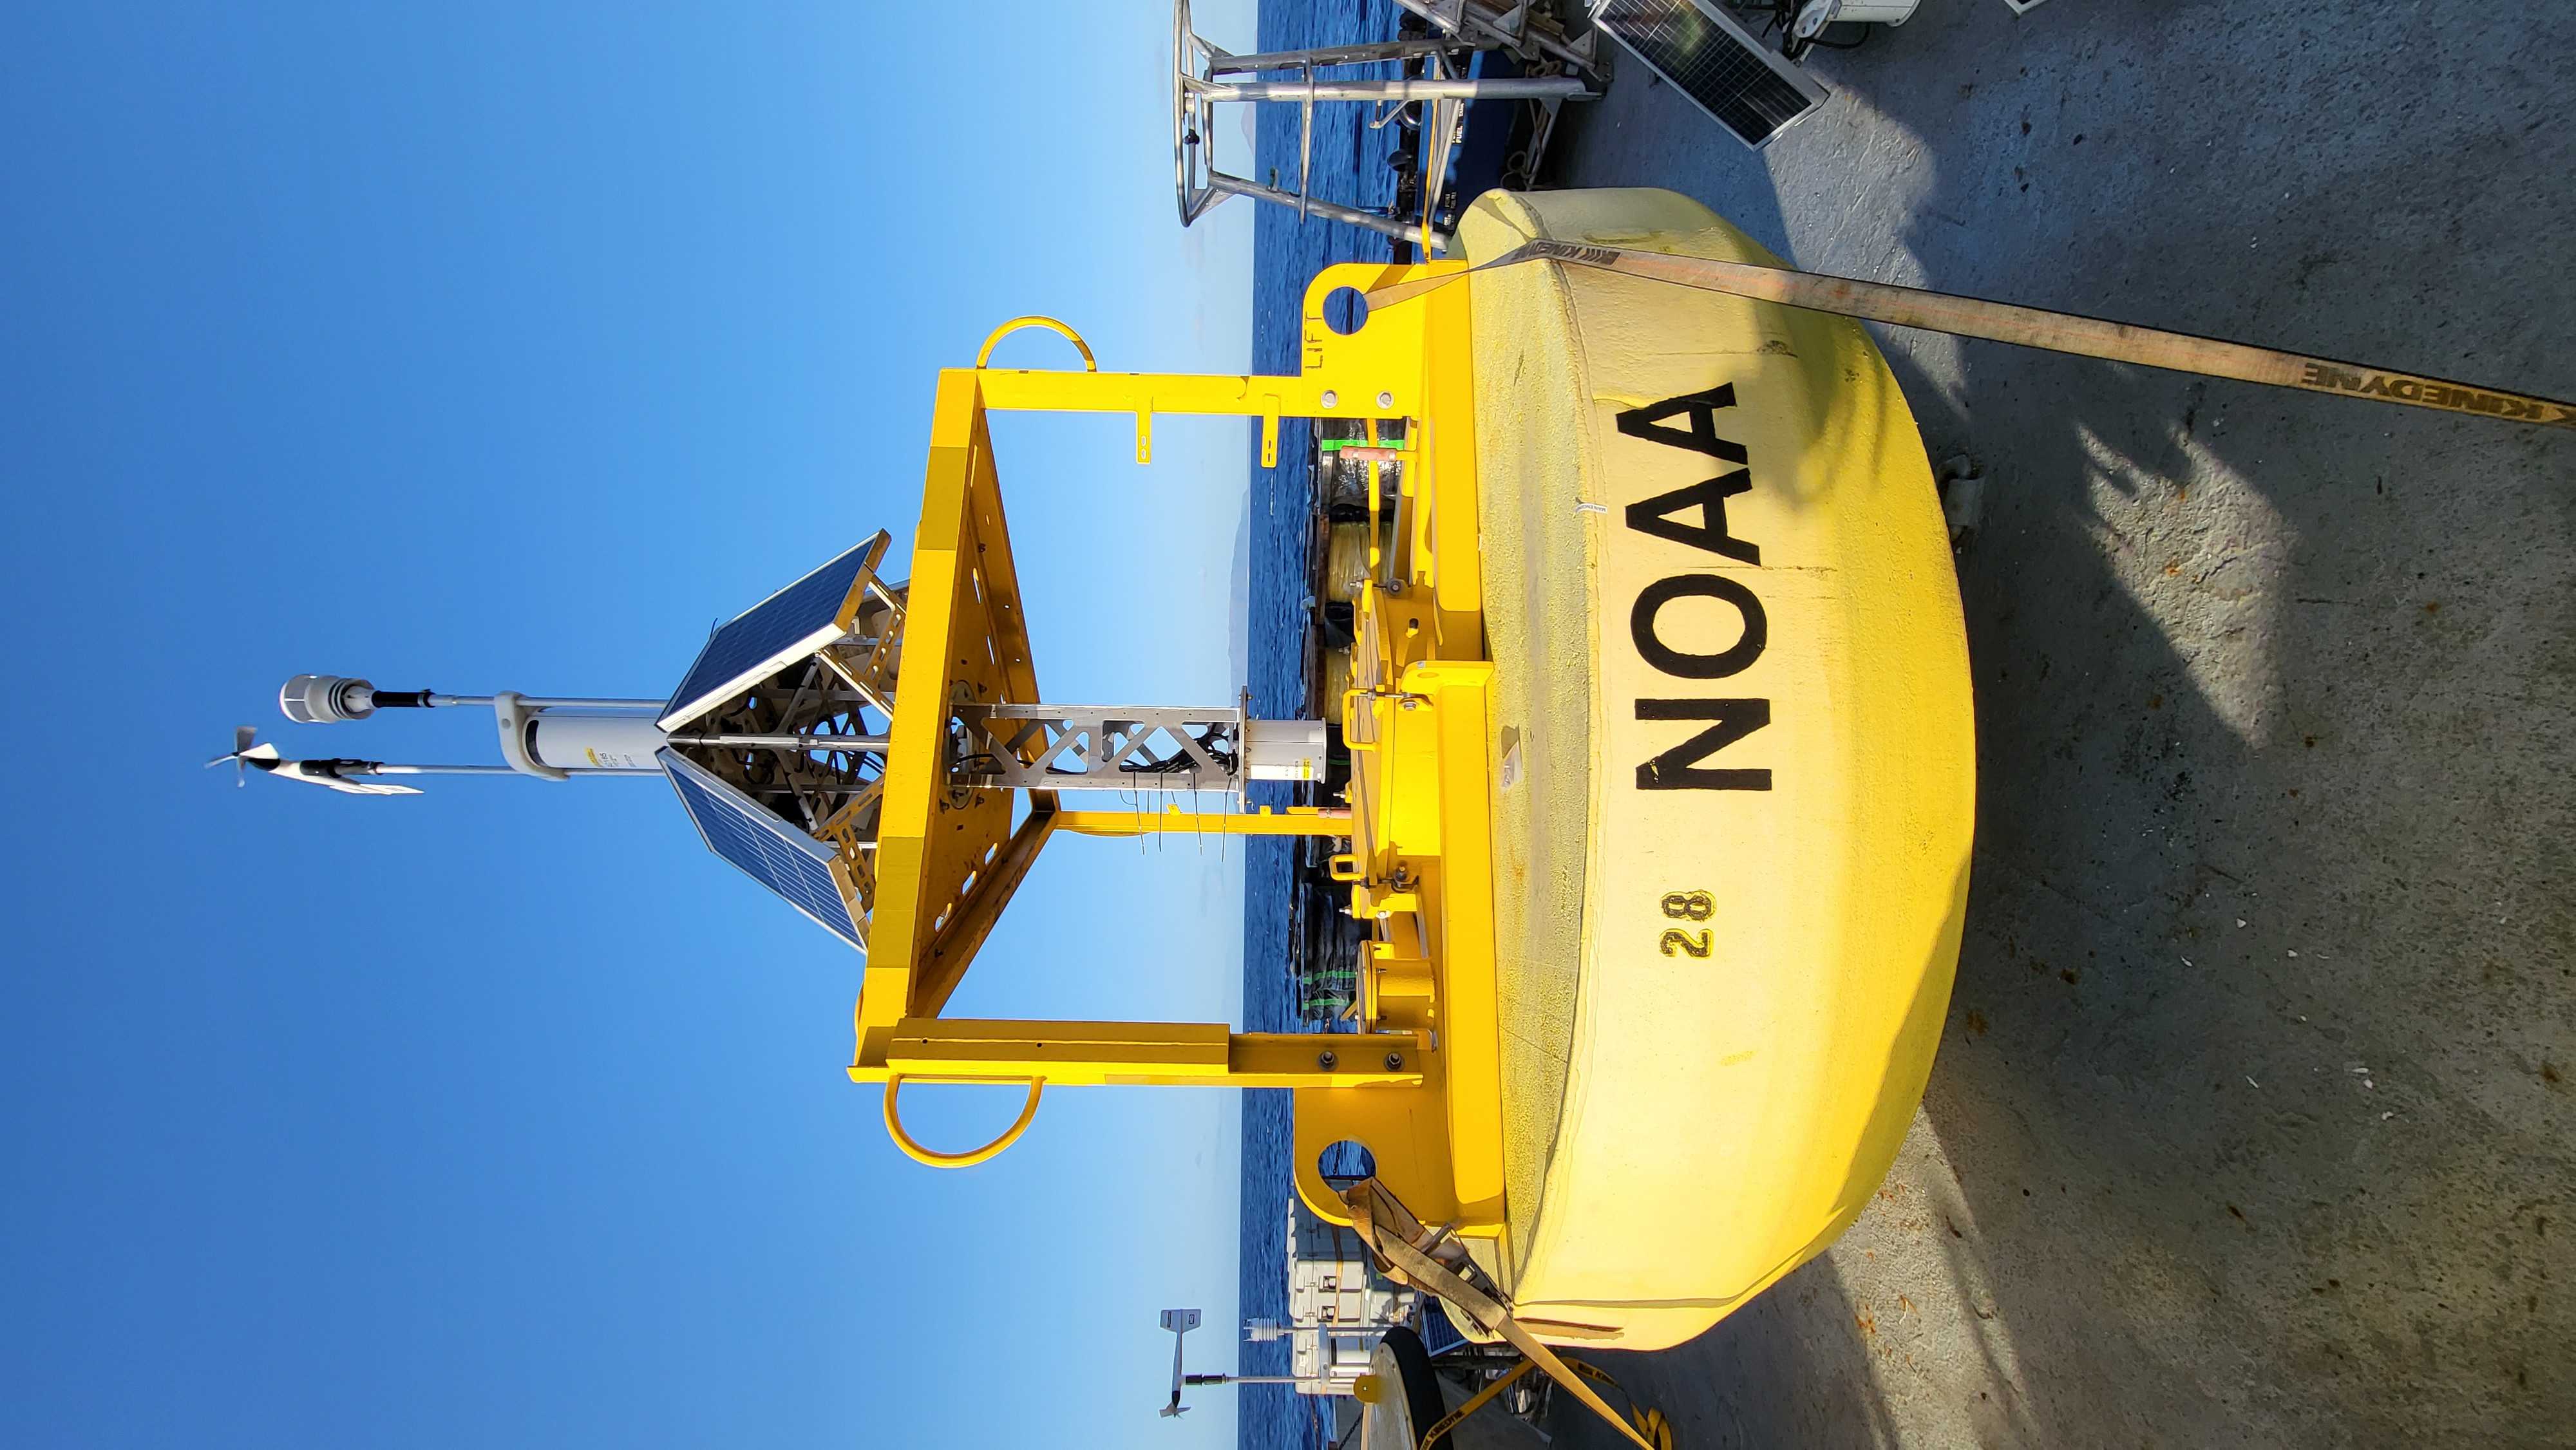 Servicing the TAO array took 34 days. The ship docked in Honolulu, Hawaii, where staff restocked supplies and rotated in a relief crew. A few days later the new crew began the next leg of the mission, where they inspected and repaired weather buoys surrounding the Hawaiian Islands. Shown here is a NOAA weather buoy ready to be deployed 300 miles off the coast of Honolulu. The buoy is nearly 10 feet in diameter, over 12 feet tall, is powered by solar panels and hosts eight sensors. 